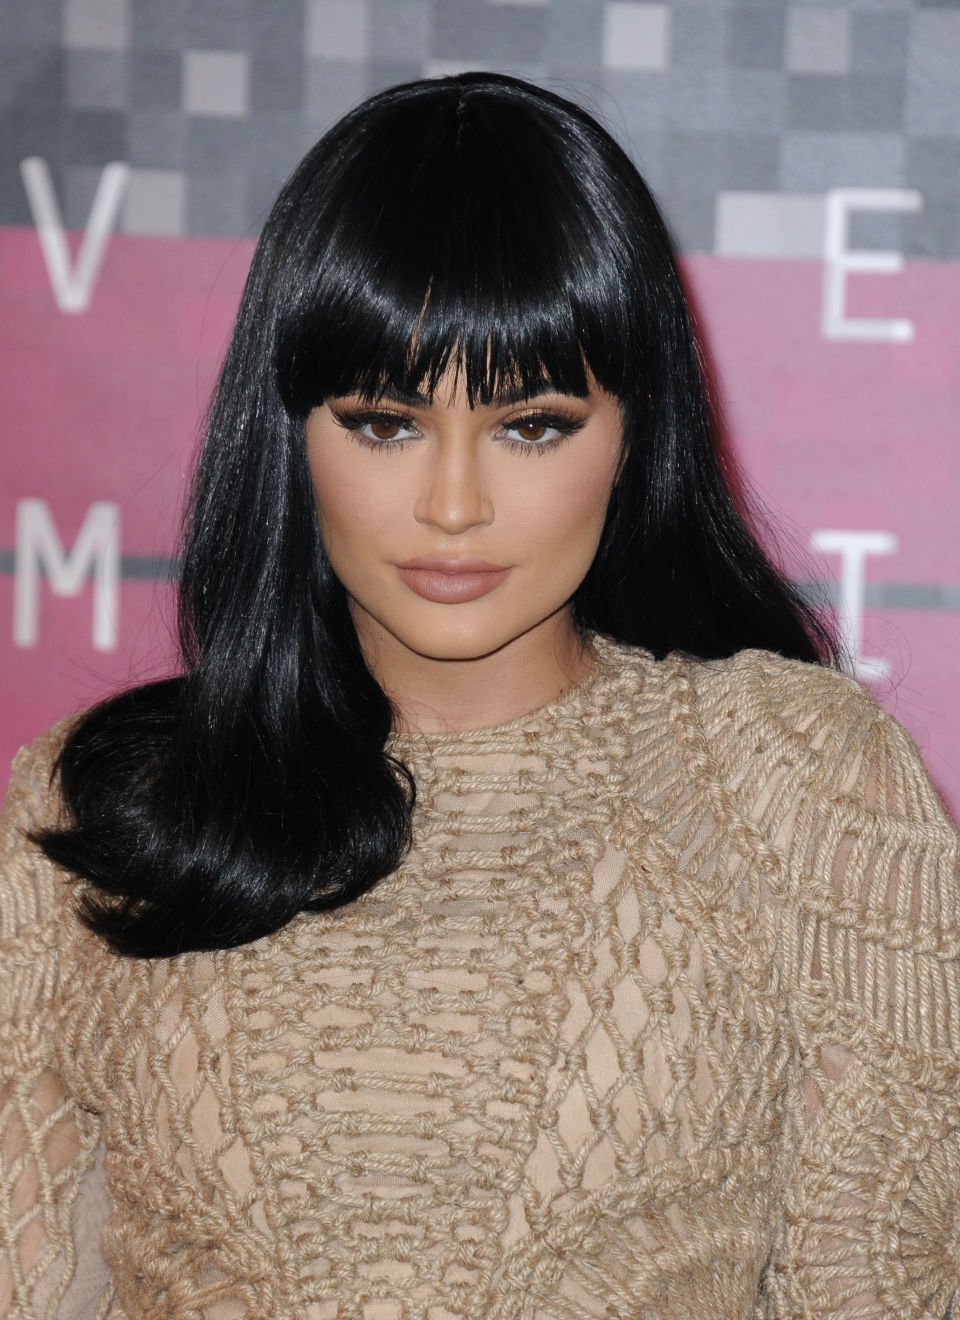 Kylie Jenner in anul 2015